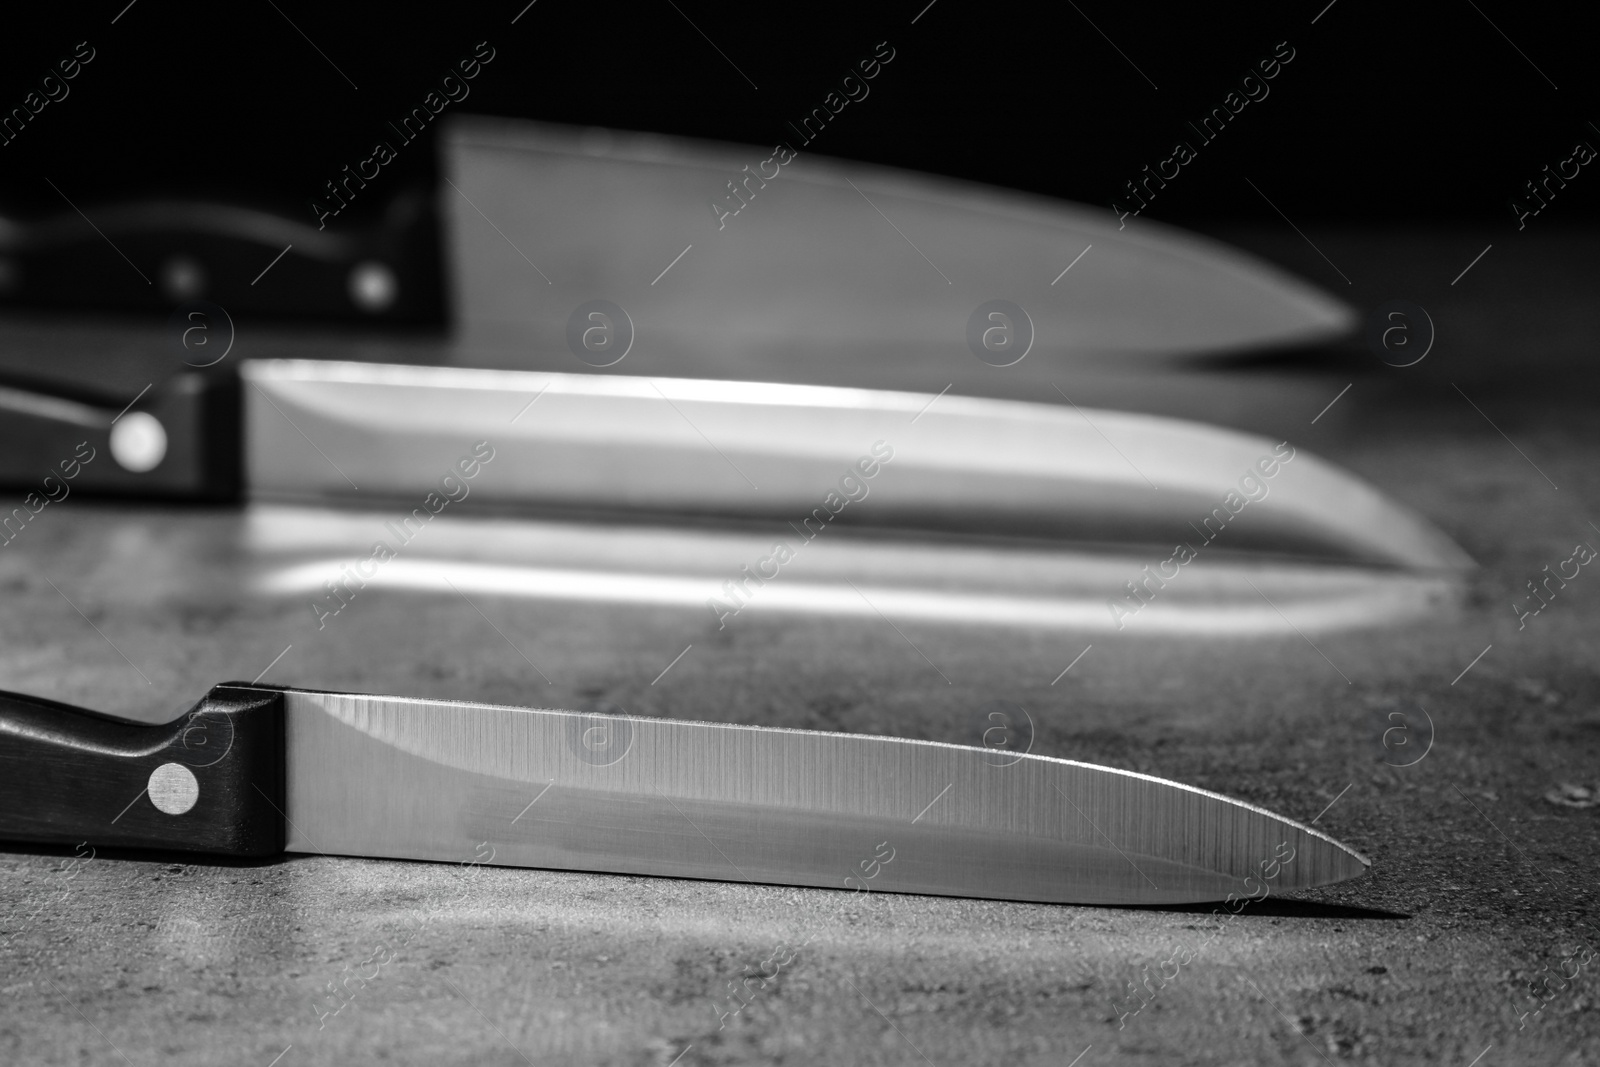 Photo of Sharp knives on table against dark background